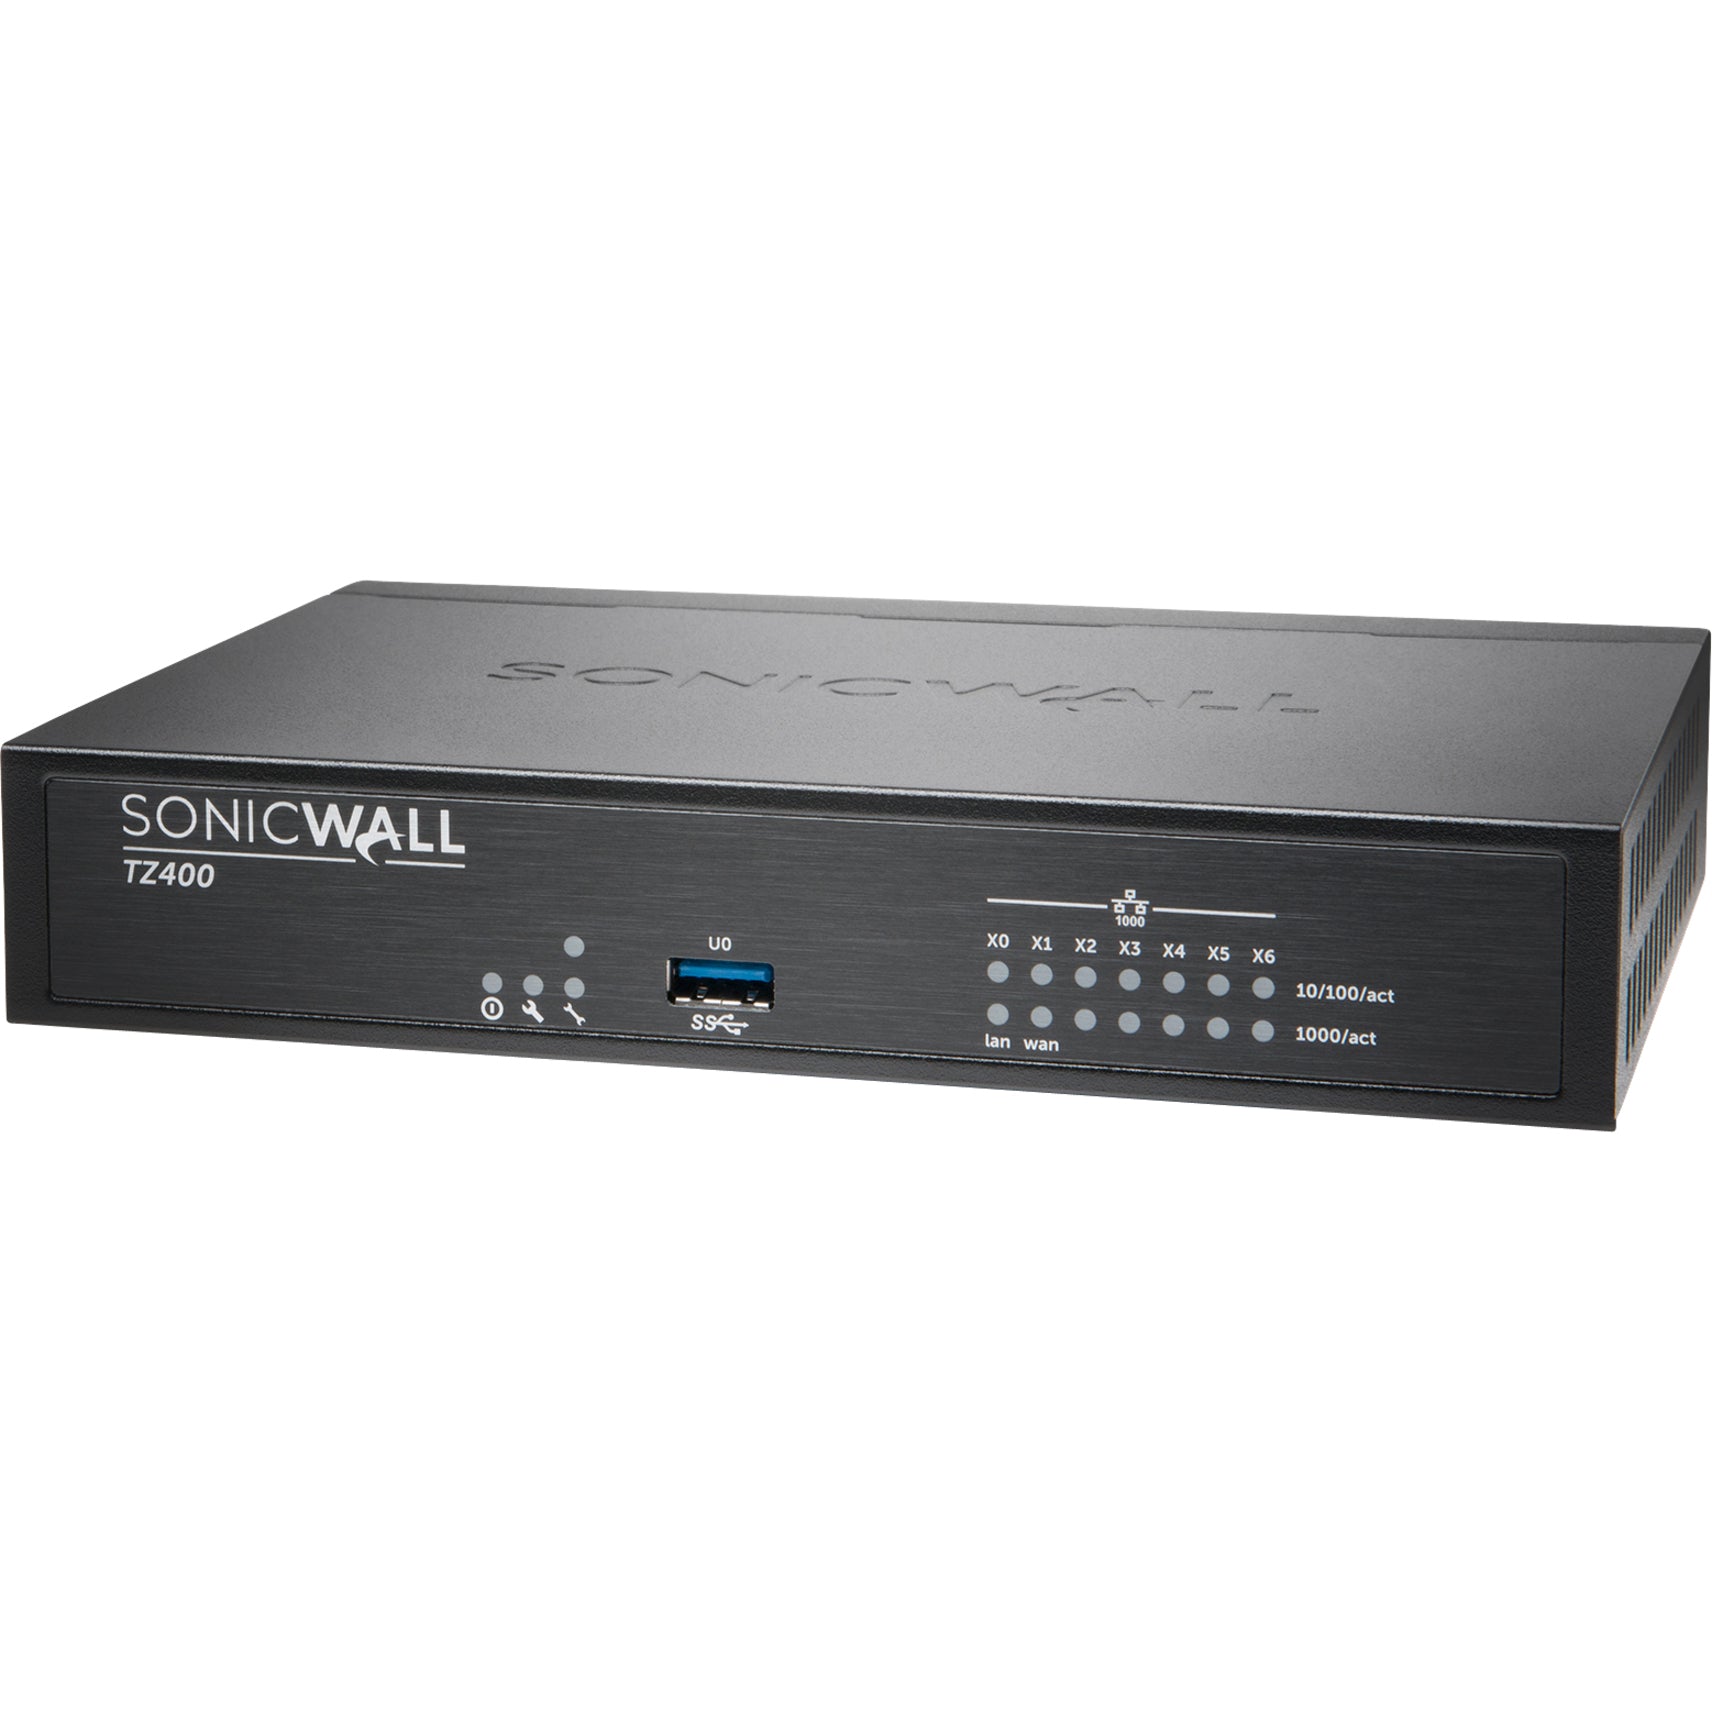 SonicWall 01-SSC-0514 TZ400 Network Security/Firewall Appliance with TotalSecure 1 Year, Comprehensive Gateway Security Suite, 7 Ports